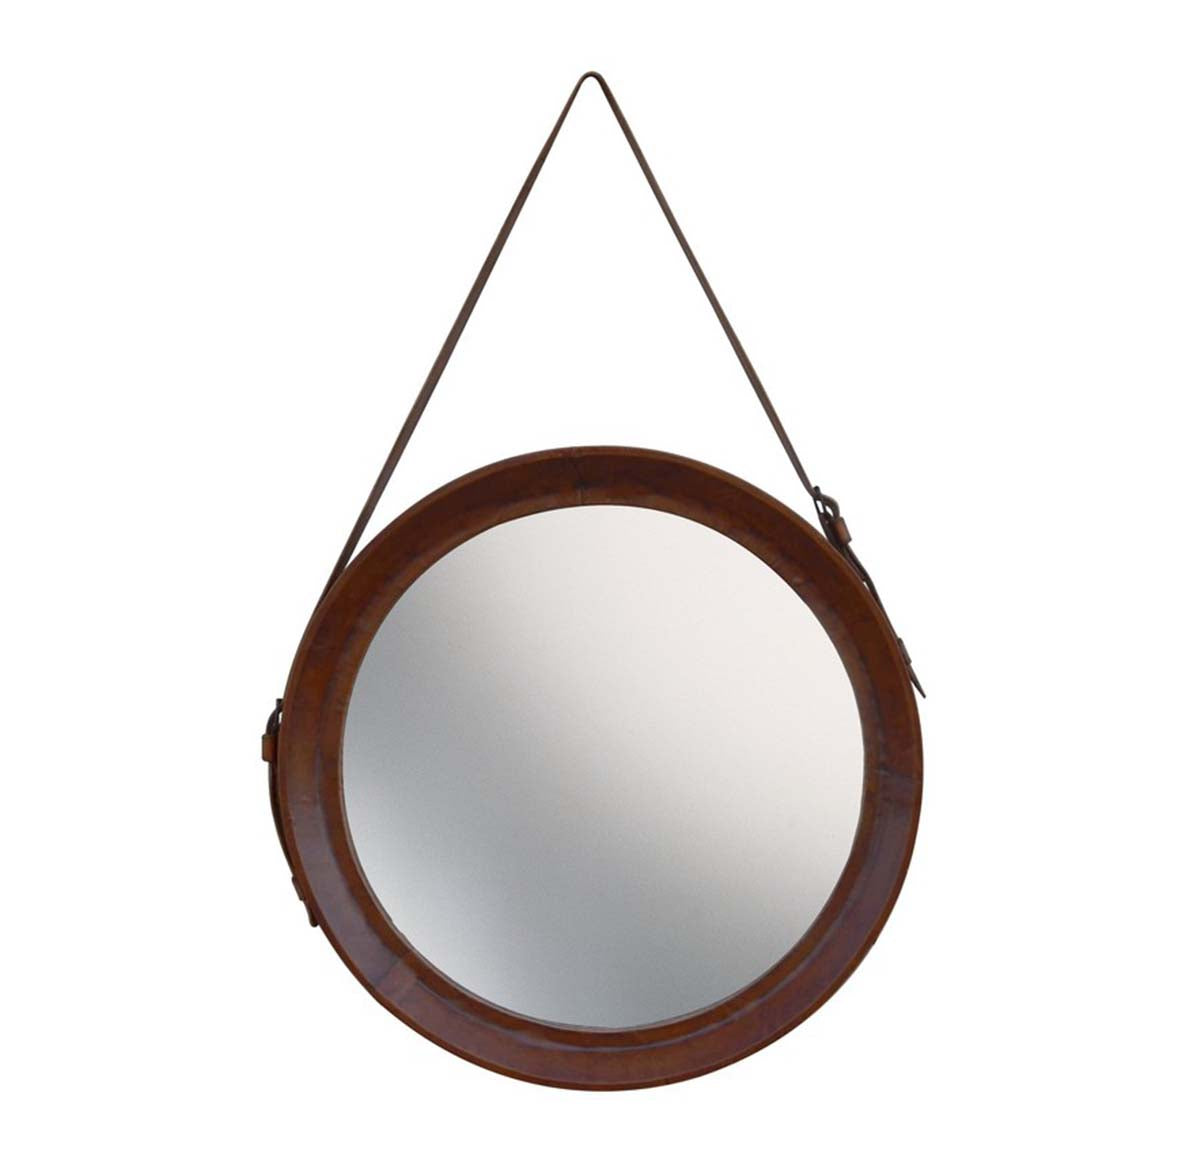 Leather Round Wall Hanging Mirror small - Natural | Mirrors | Home Decor